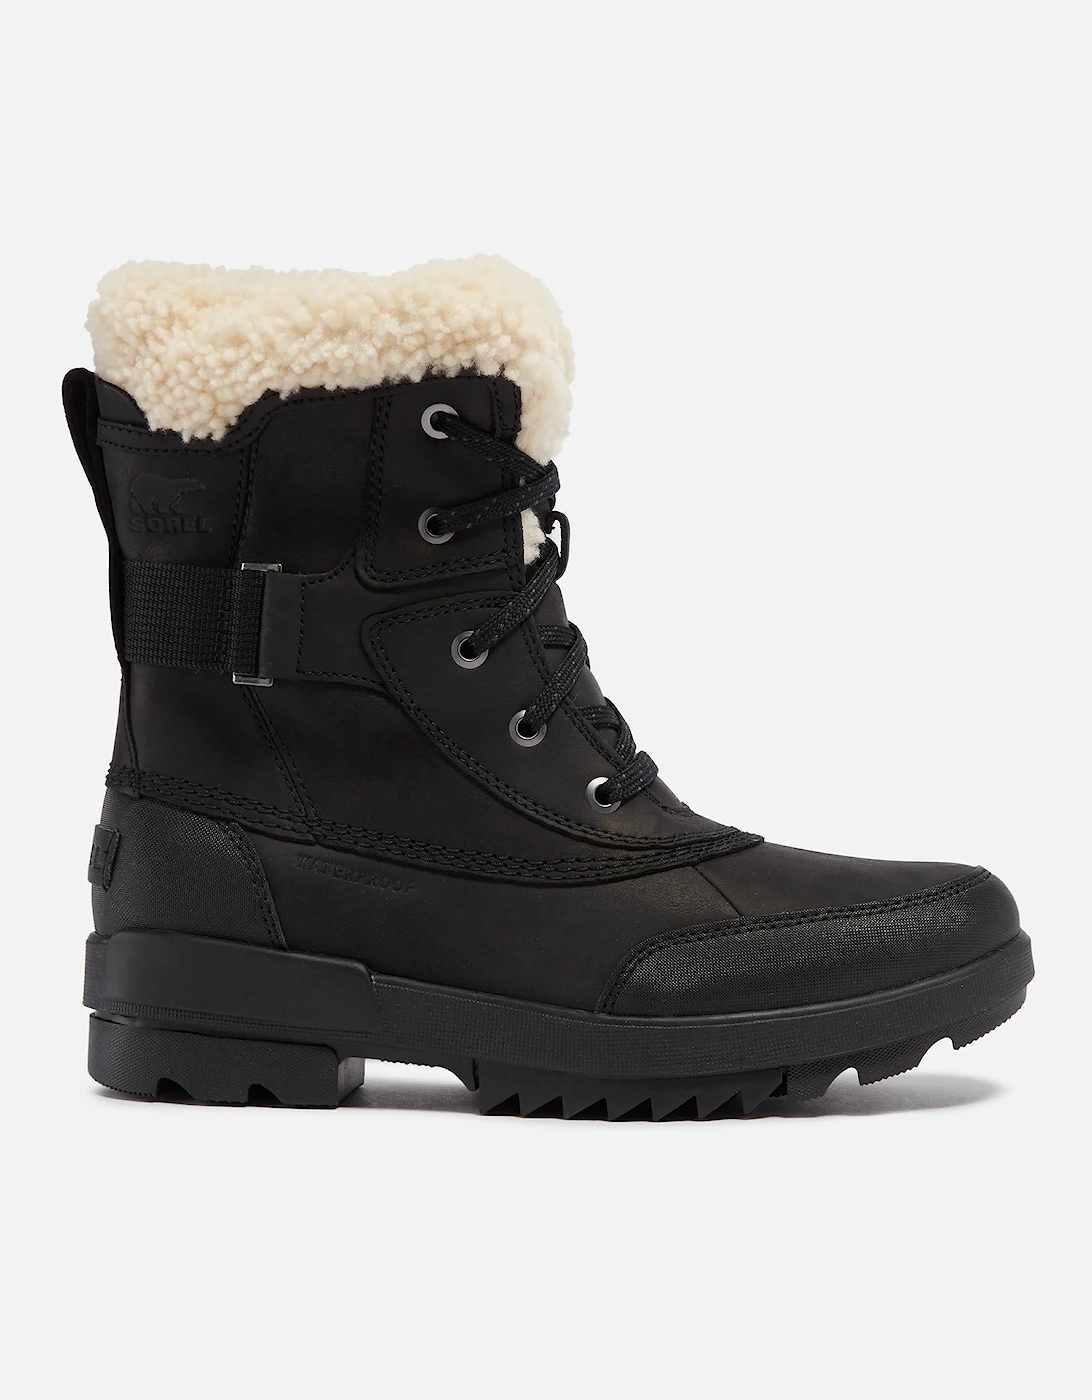 Torino Ii Parc Shearling, Rubber and Leather Boots - - Home - Women's Shoes - Women's Snow Boots - Torino Ii Parc Shearling, Rubber and Leather Boots, 2 of 1